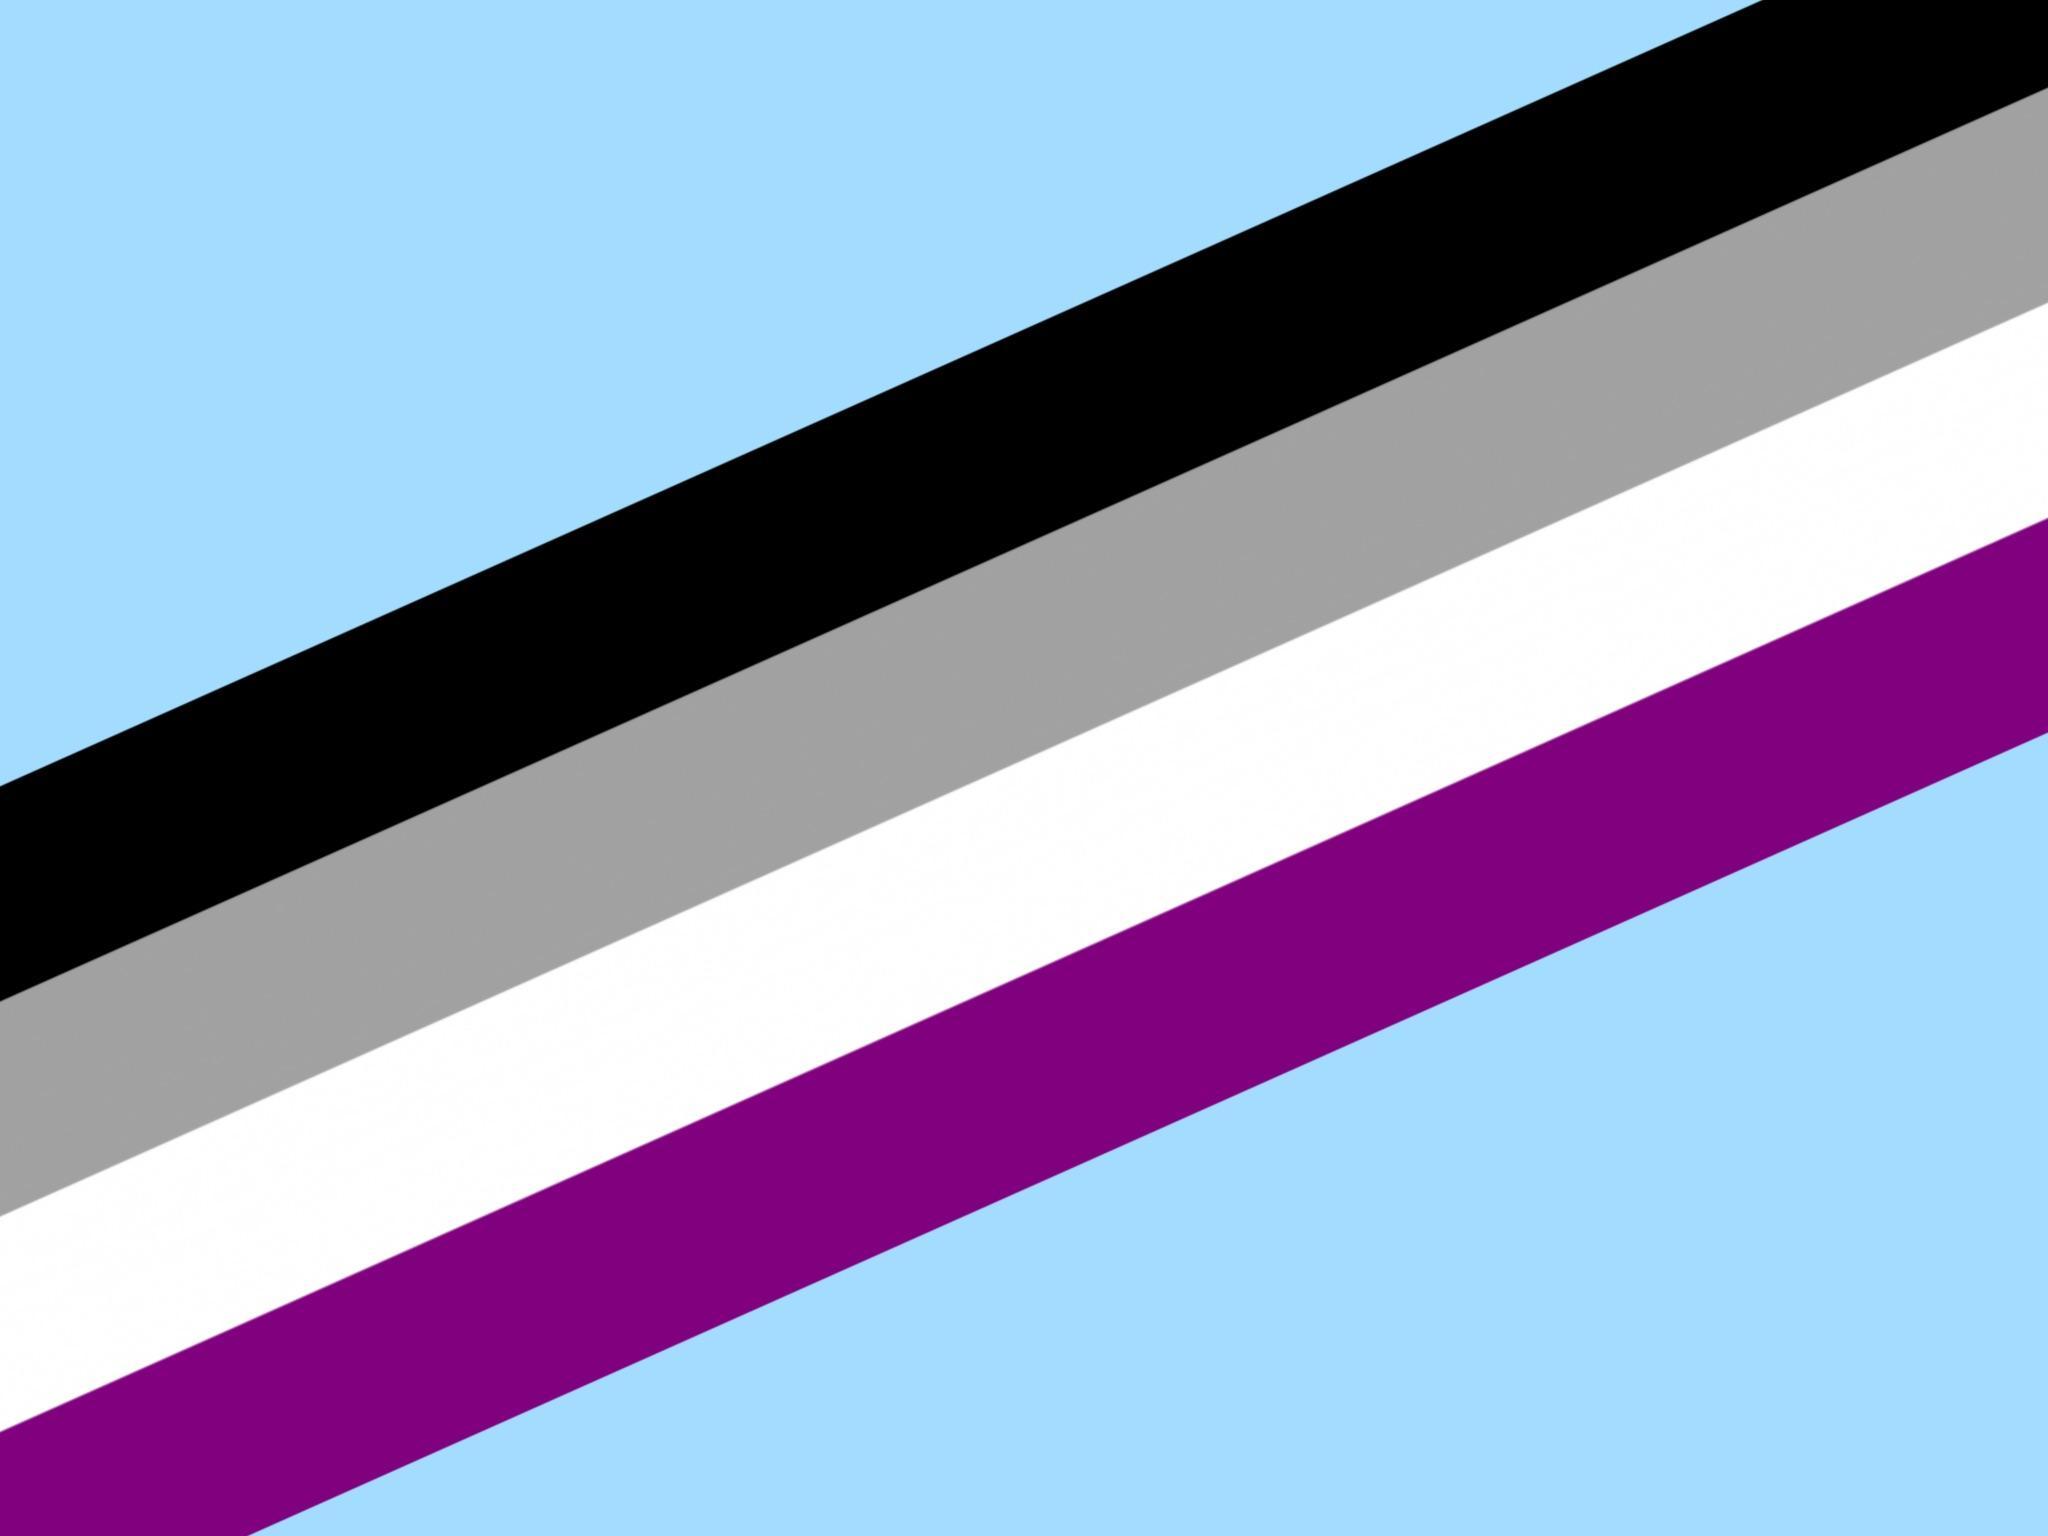 My friend made an asexual flag wallpaper in